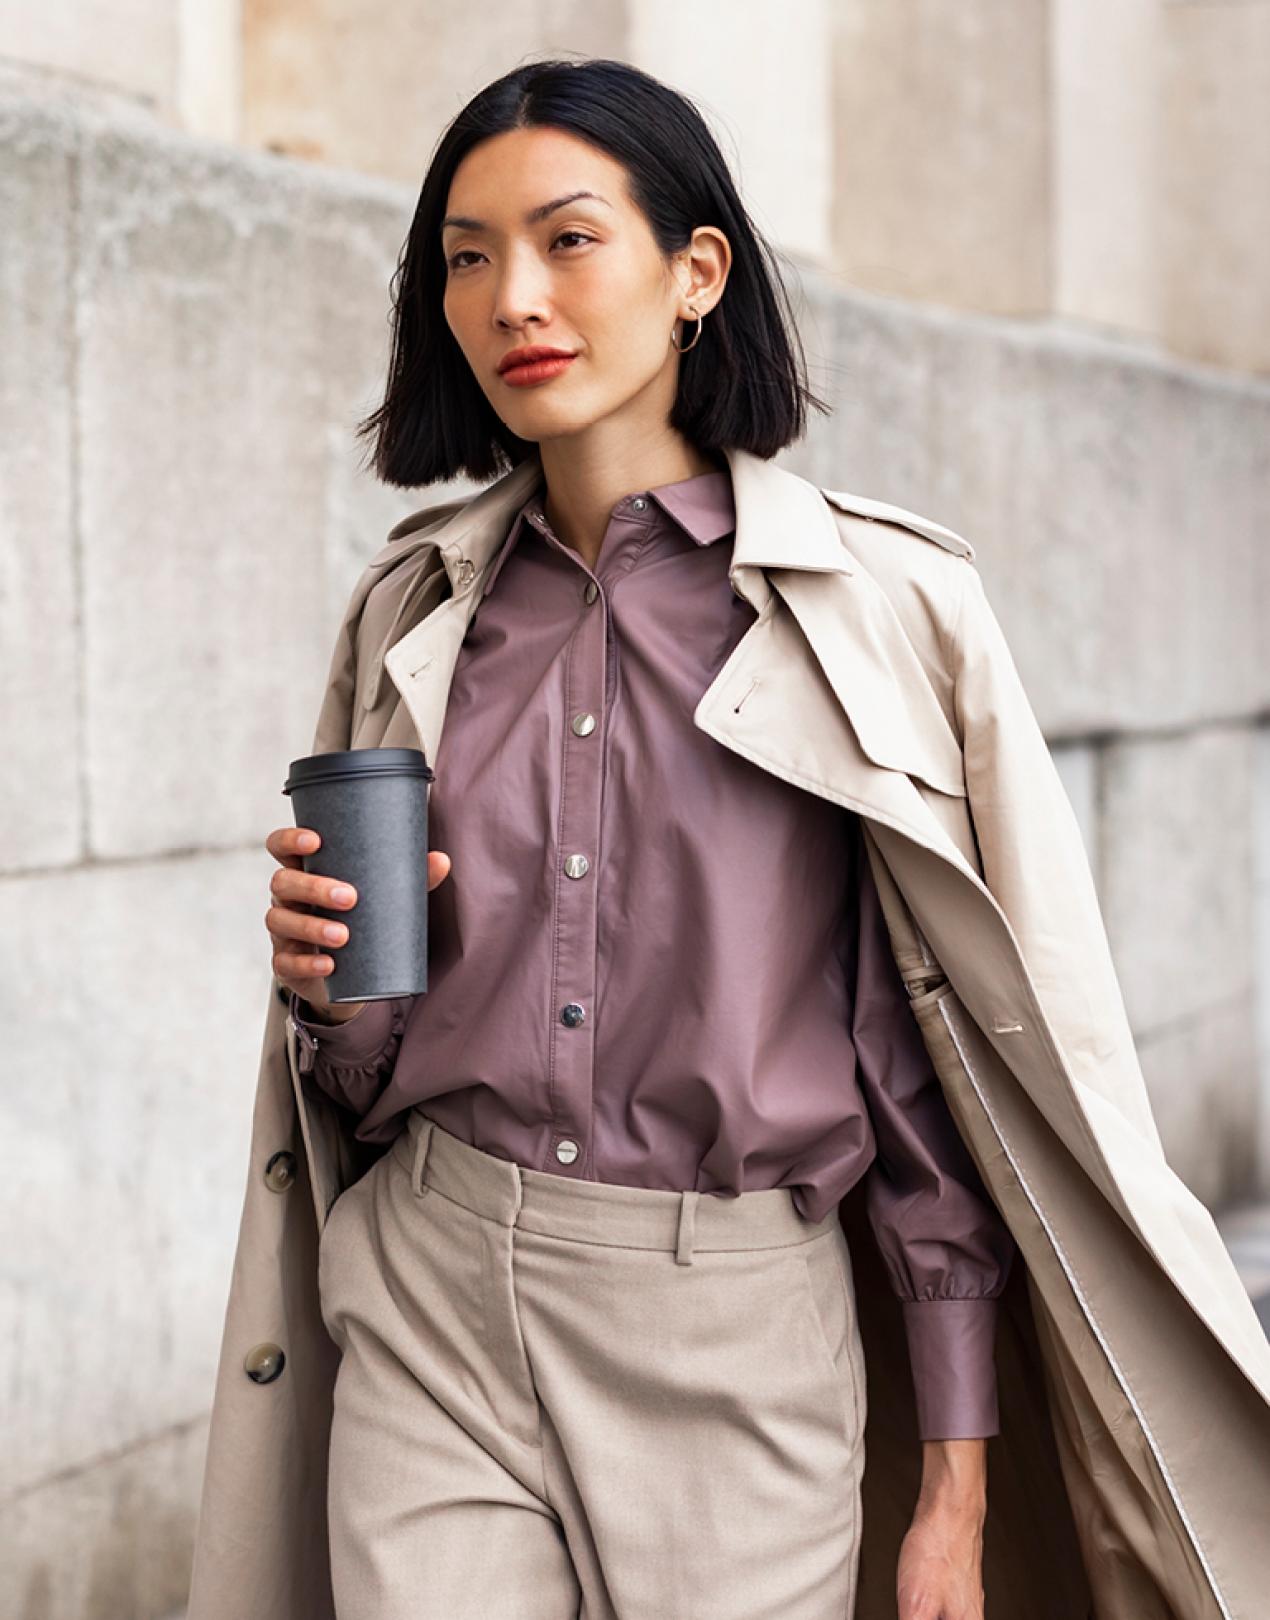 A woman walking and holding a cup of coffee